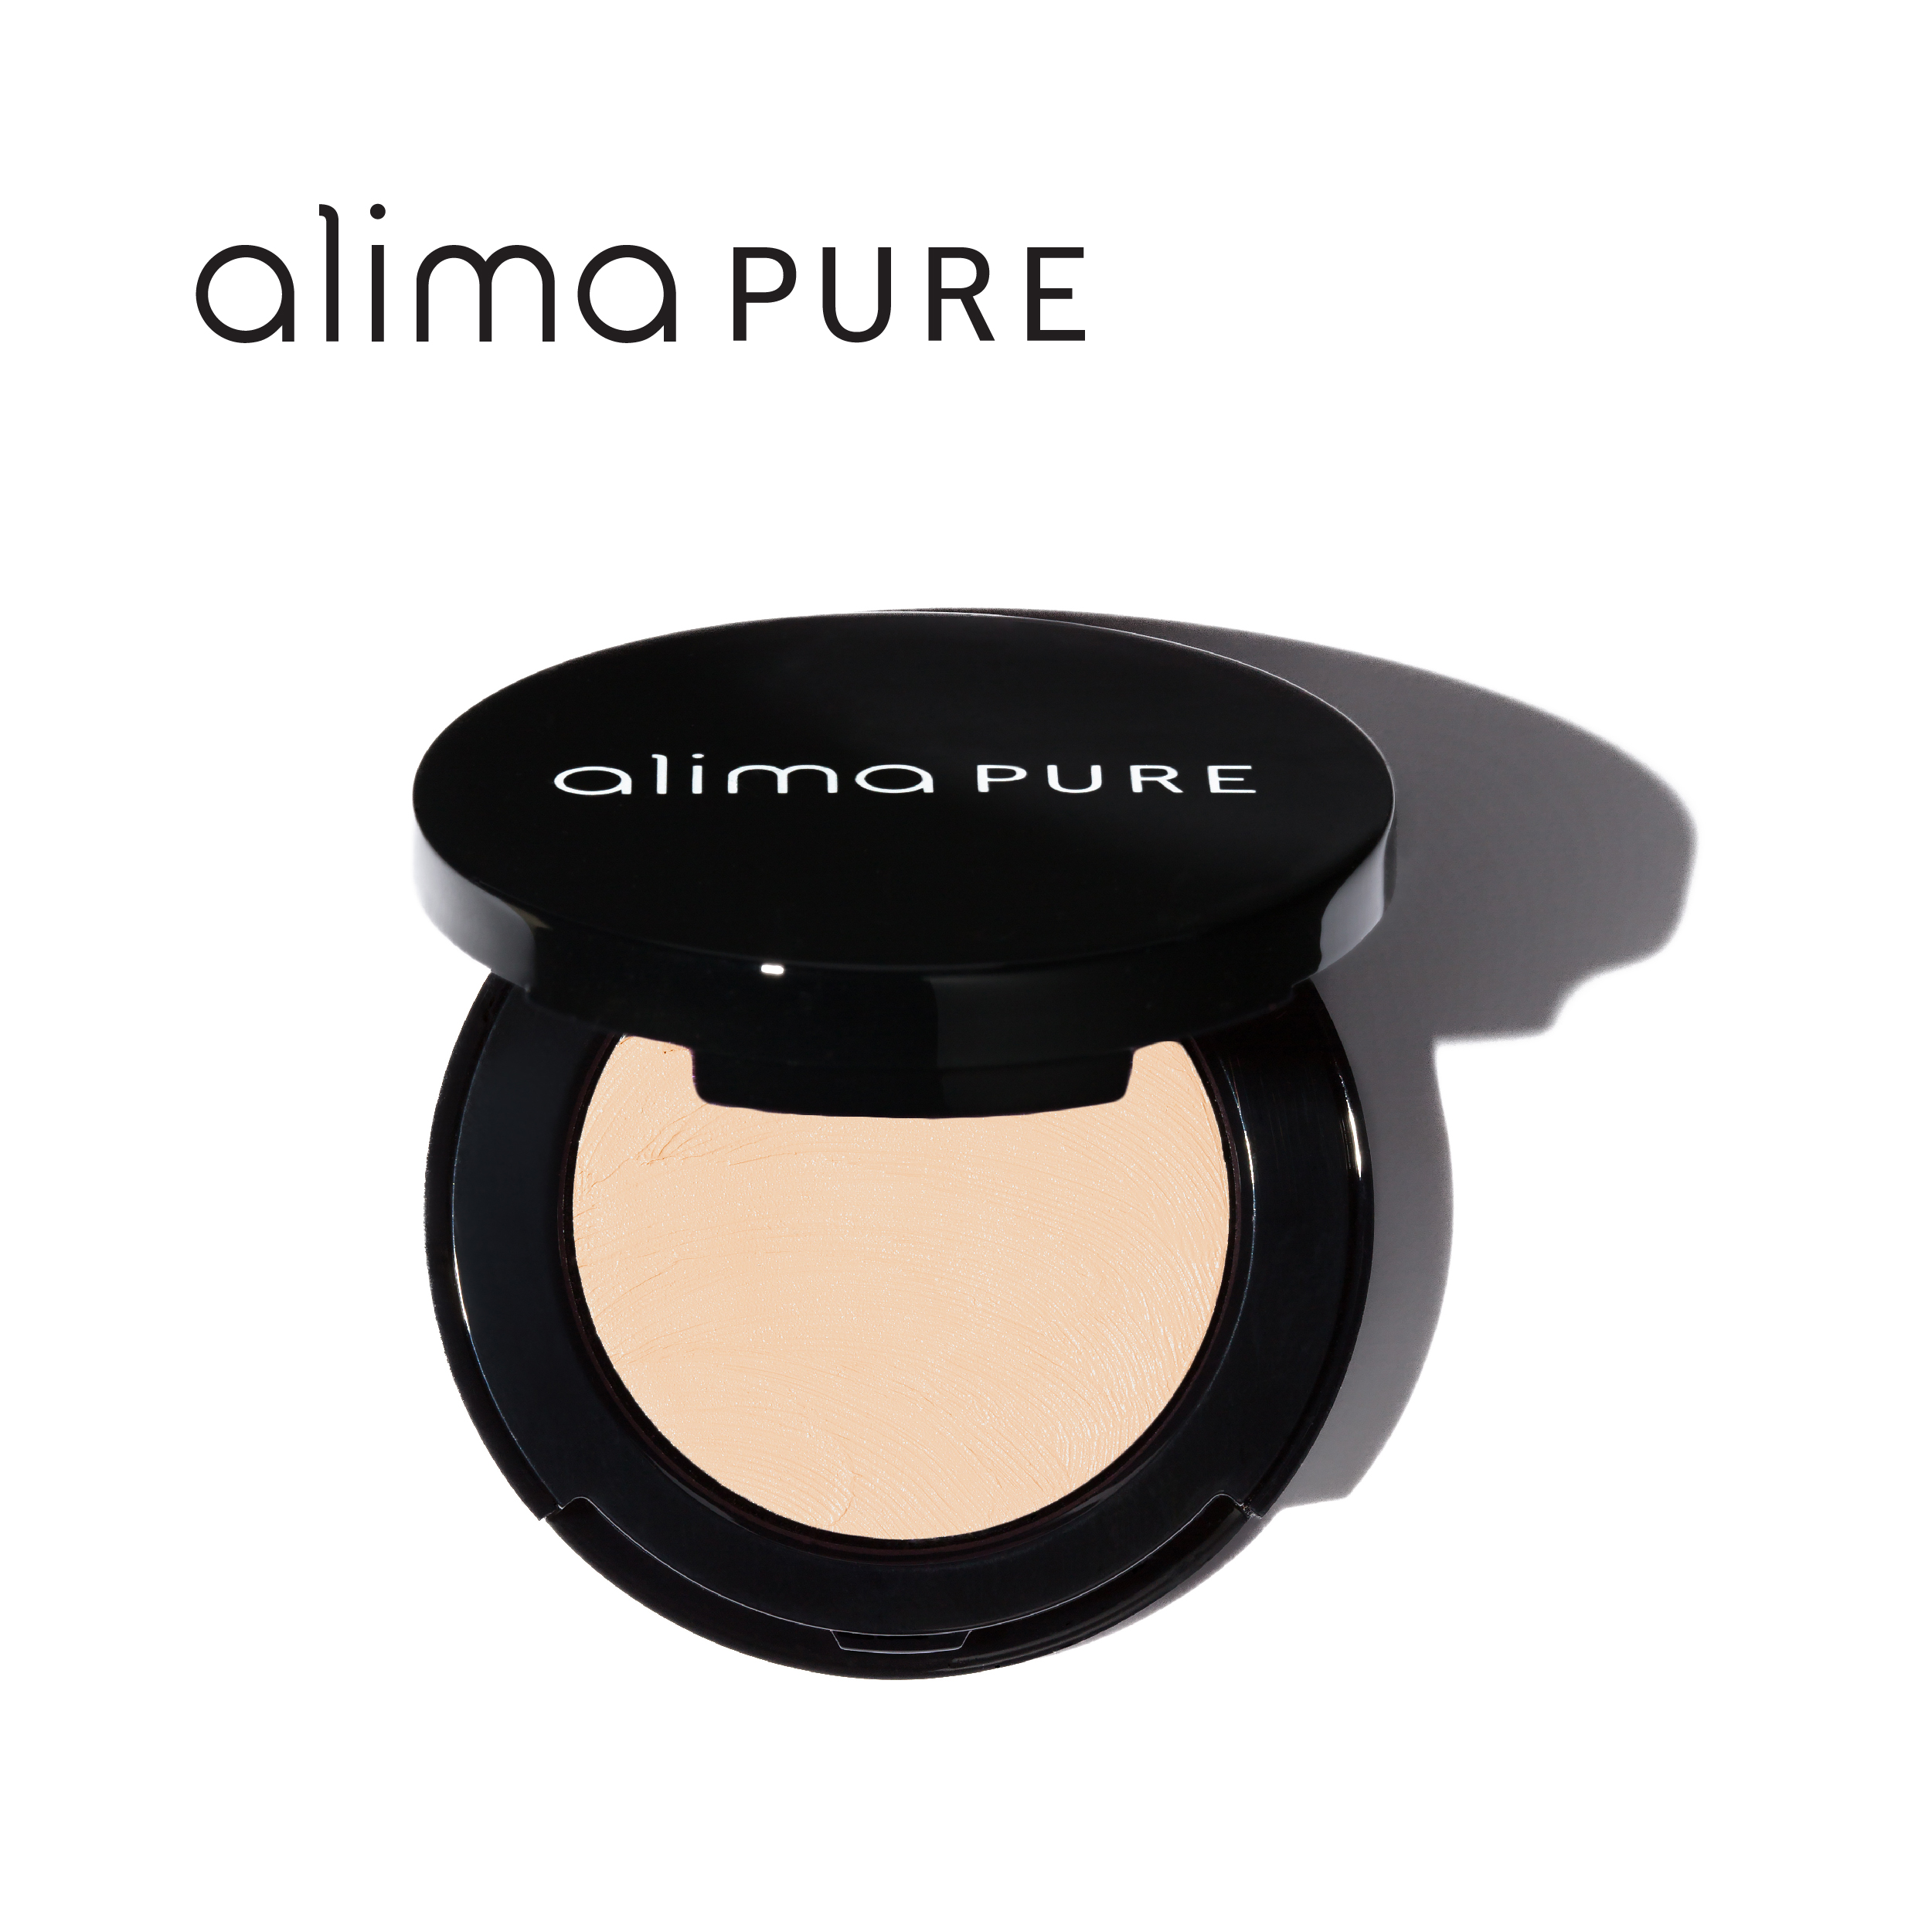 alima pure pressed eye shadow in etheral